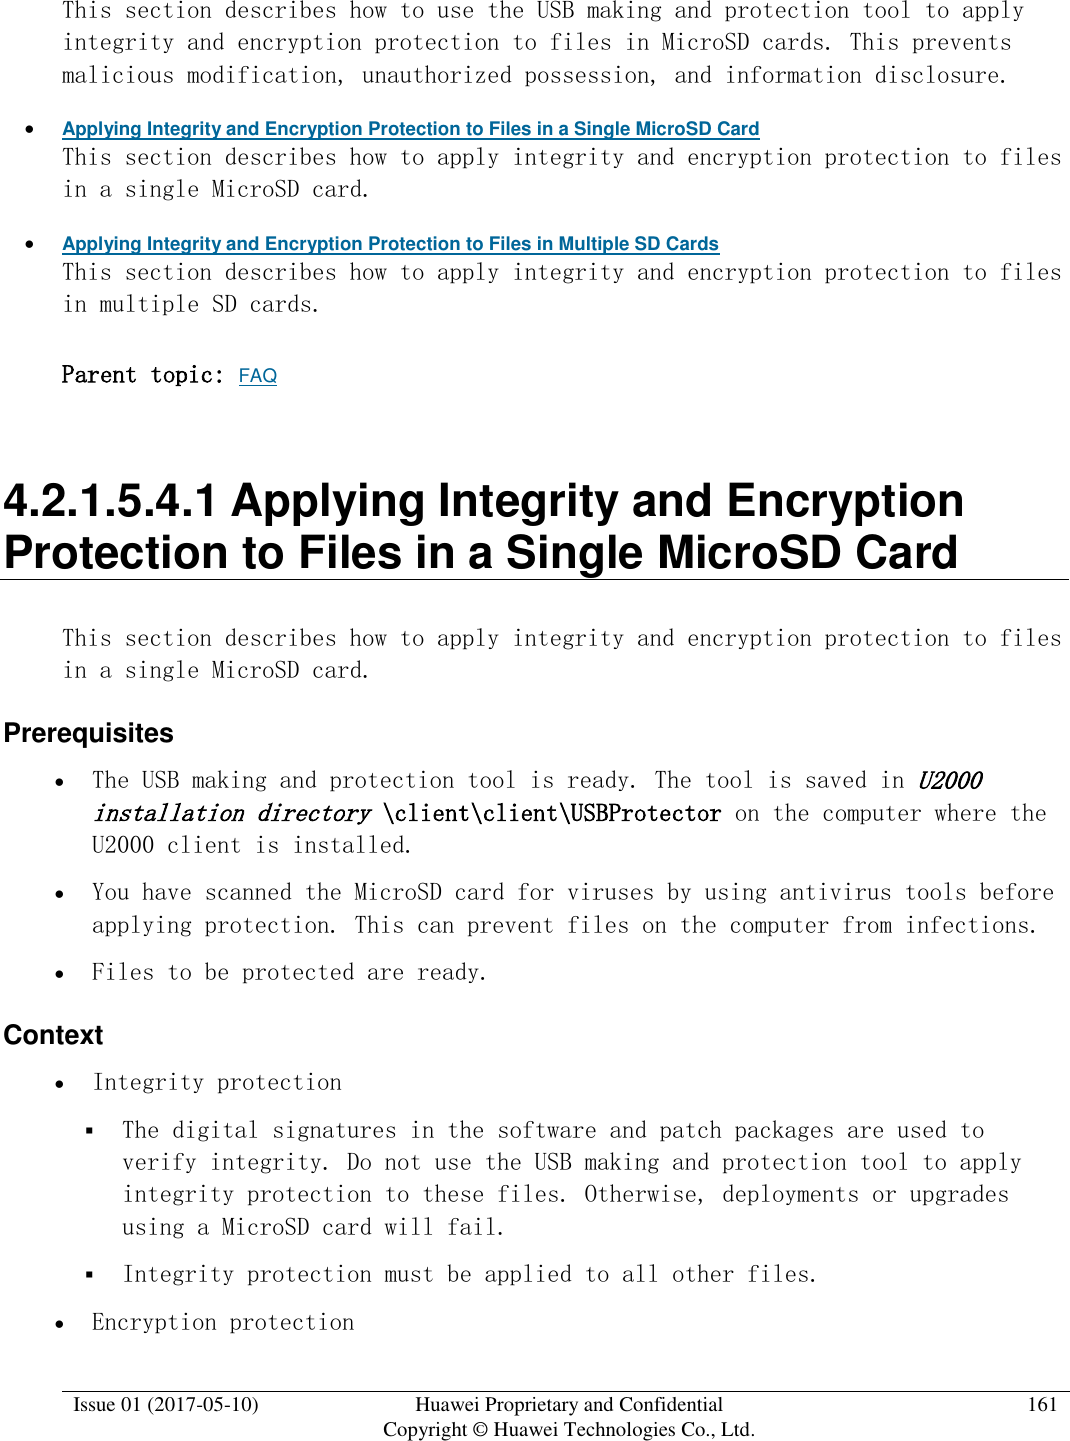  Issue 01 (2017-05-10) Huawei Proprietary and Confidential      Copyright © Huawei Technologies Co., Ltd. 161  This section describes how to use the USB making and protection tool to apply integrity and encryption protection to files in MicroSD cards. This prevents malicious modification, unauthorized possession, and information disclosure.   Applying Integrity and Encryption Protection to Files in a Single MicroSD Card This section describes how to apply integrity and encryption protection to files in a single MicroSD card.  Applying Integrity and Encryption Protection to Files in Multiple SD Cards This section describes how to apply integrity and encryption protection to files in multiple SD cards.  Parent topic: FAQ 4.2.1.5.4.1 Applying Integrity and Encryption Protection to Files in a Single MicroSD Card This section describes how to apply integrity and encryption protection to files in a single MicroSD card. Prerequisites  The USB making and protection tool is ready. The tool is saved in U2000 installation directory \client\client\USBProtector on the computer where the U2000 client is installed.  You have scanned the MicroSD card for viruses by using antivirus tools before applying protection. This can prevent files on the computer from infections.  Files to be protected are ready. Context  Integrity protection  The digital signatures in the software and patch packages are used to verify integrity. Do not use the USB making and protection tool to apply integrity protection to these files. Otherwise, deployments or upgrades using a MicroSD card will fail.  Integrity protection must be applied to all other files.  Encryption protection 